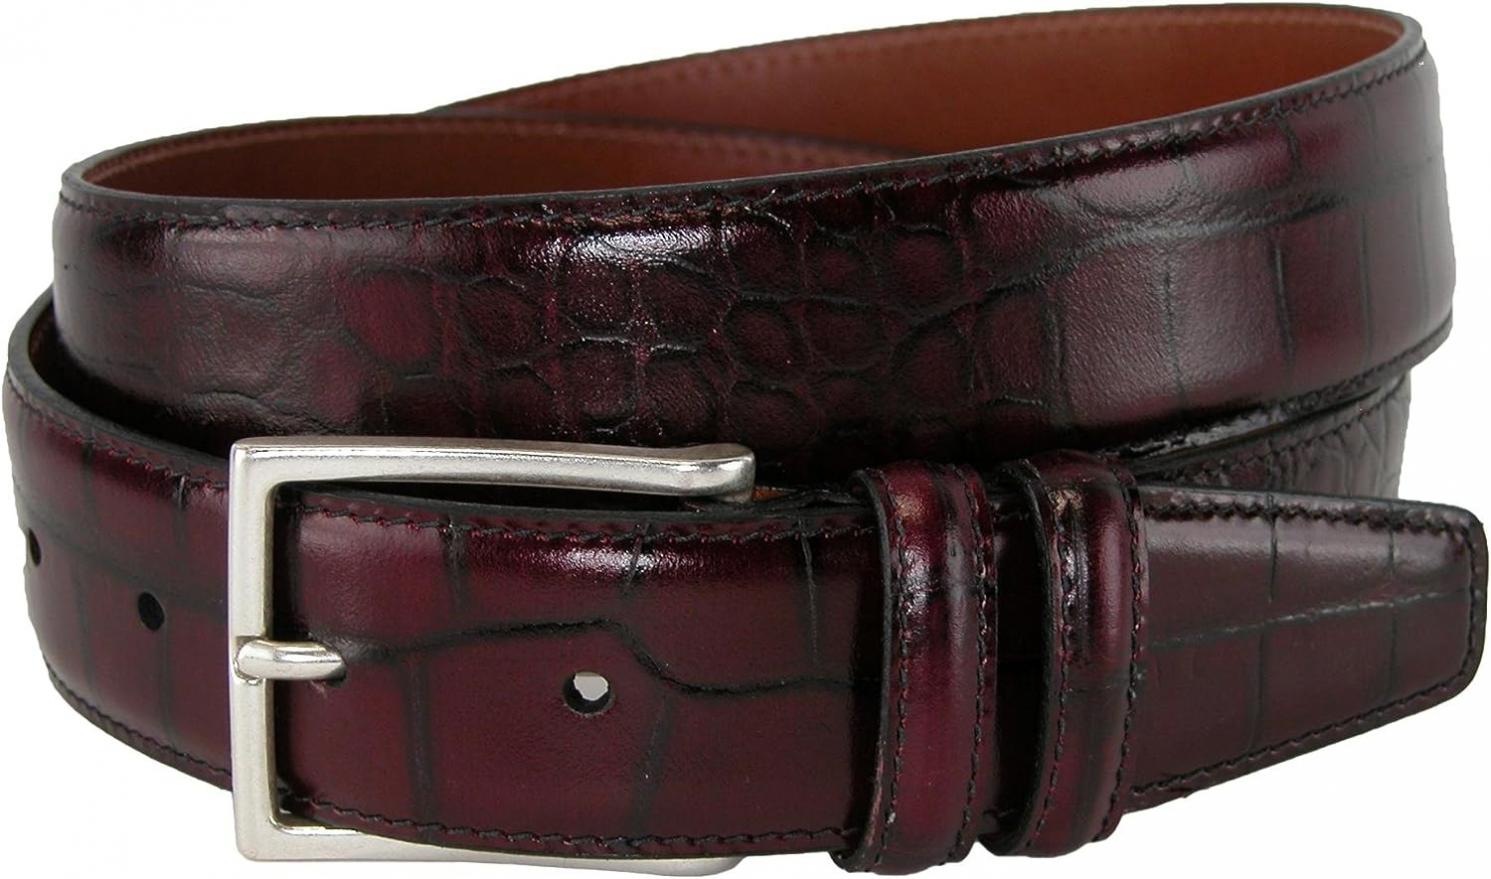 Dress Belt for Men, Tanned Leather Accessories (Crocodile)